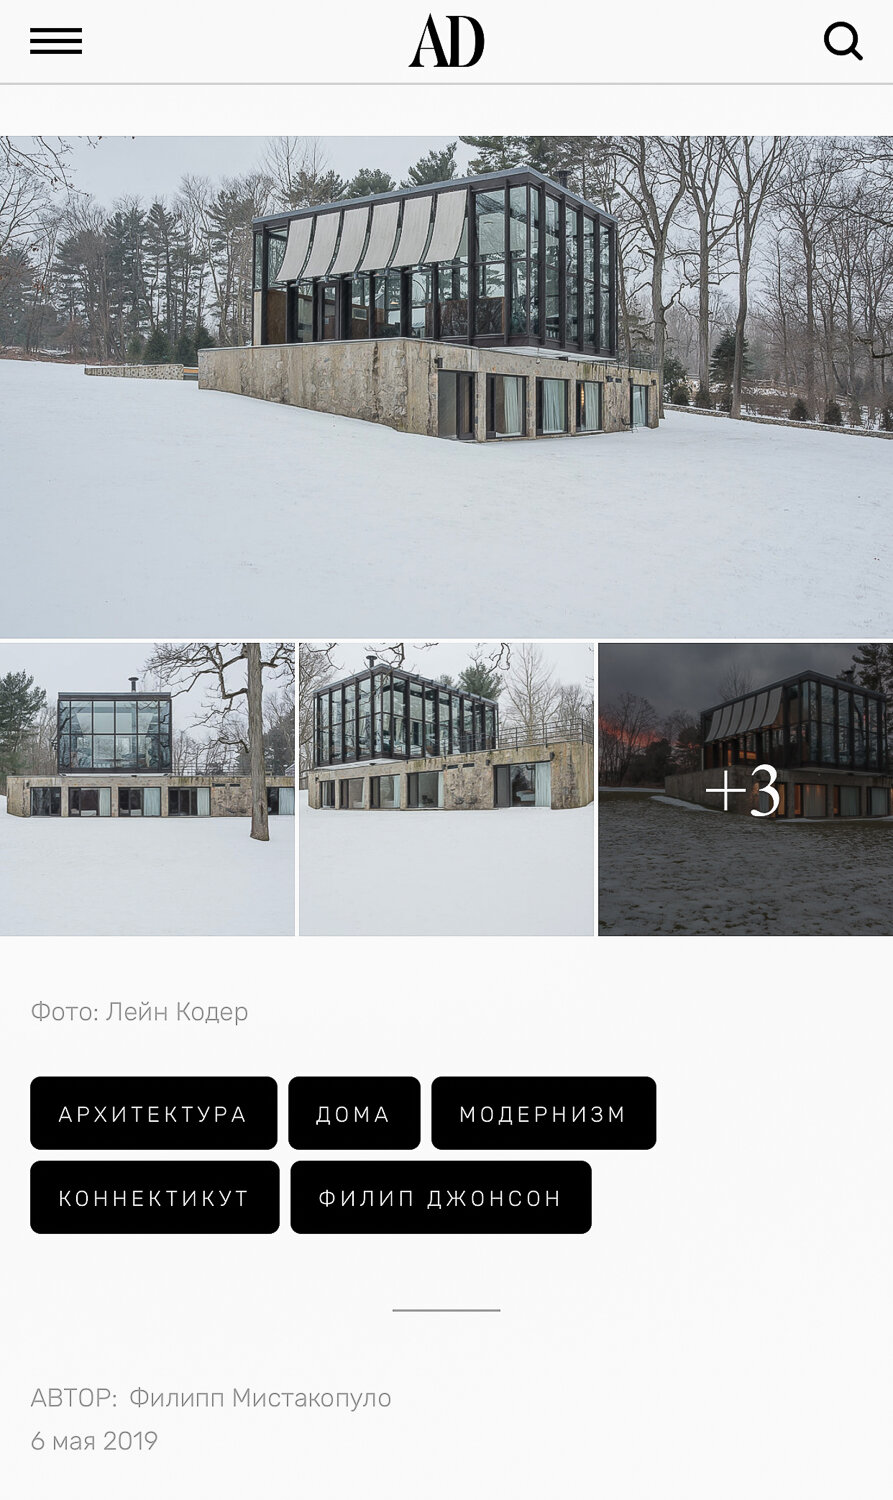 ARCHITECTURAL DIGEST RUSSIA - The Wiley House